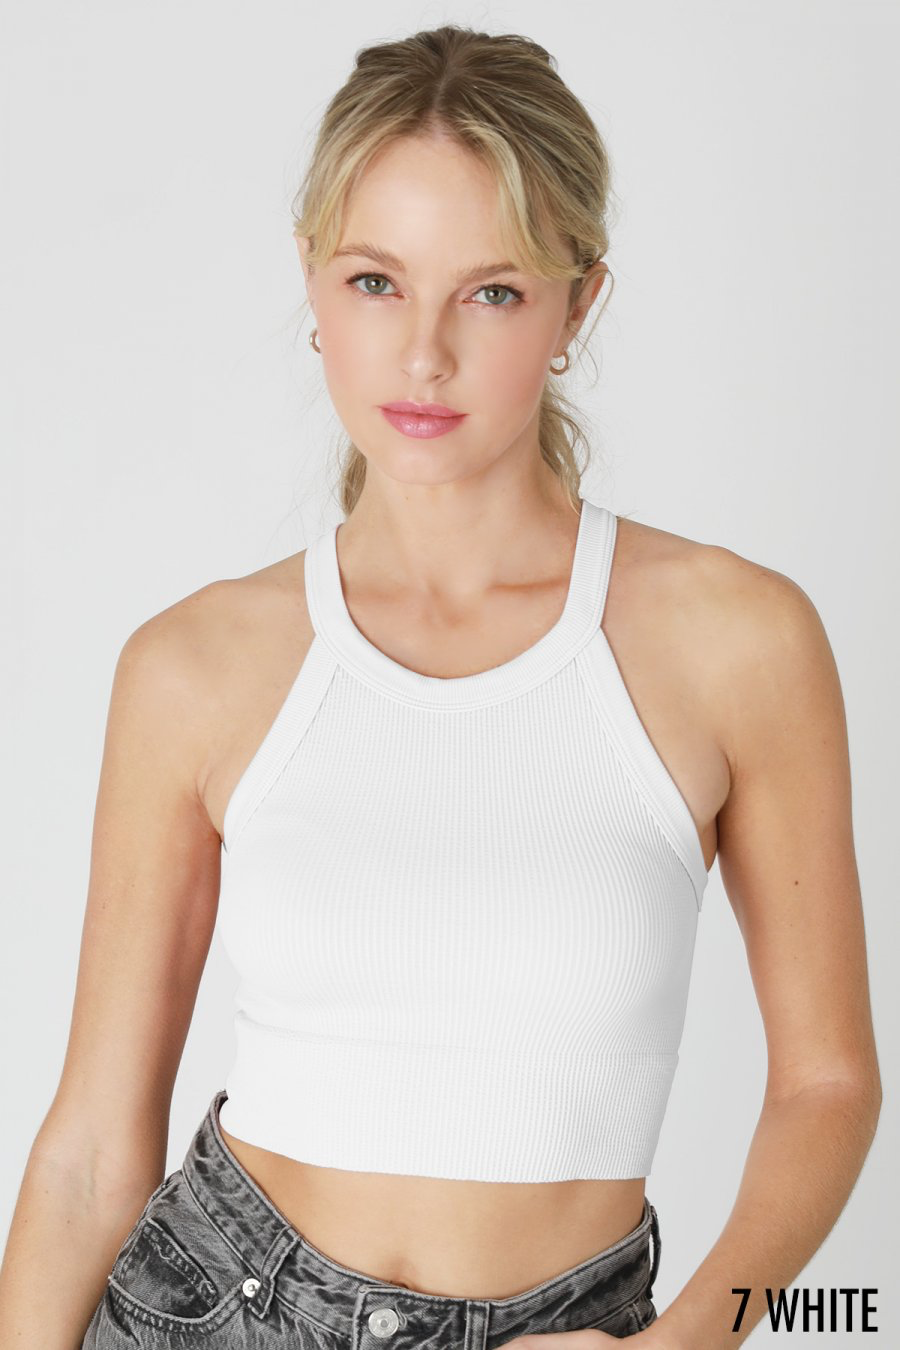 Featuring a seamless, ribbed, high neck cut tank top with a cropped fit in the color White.